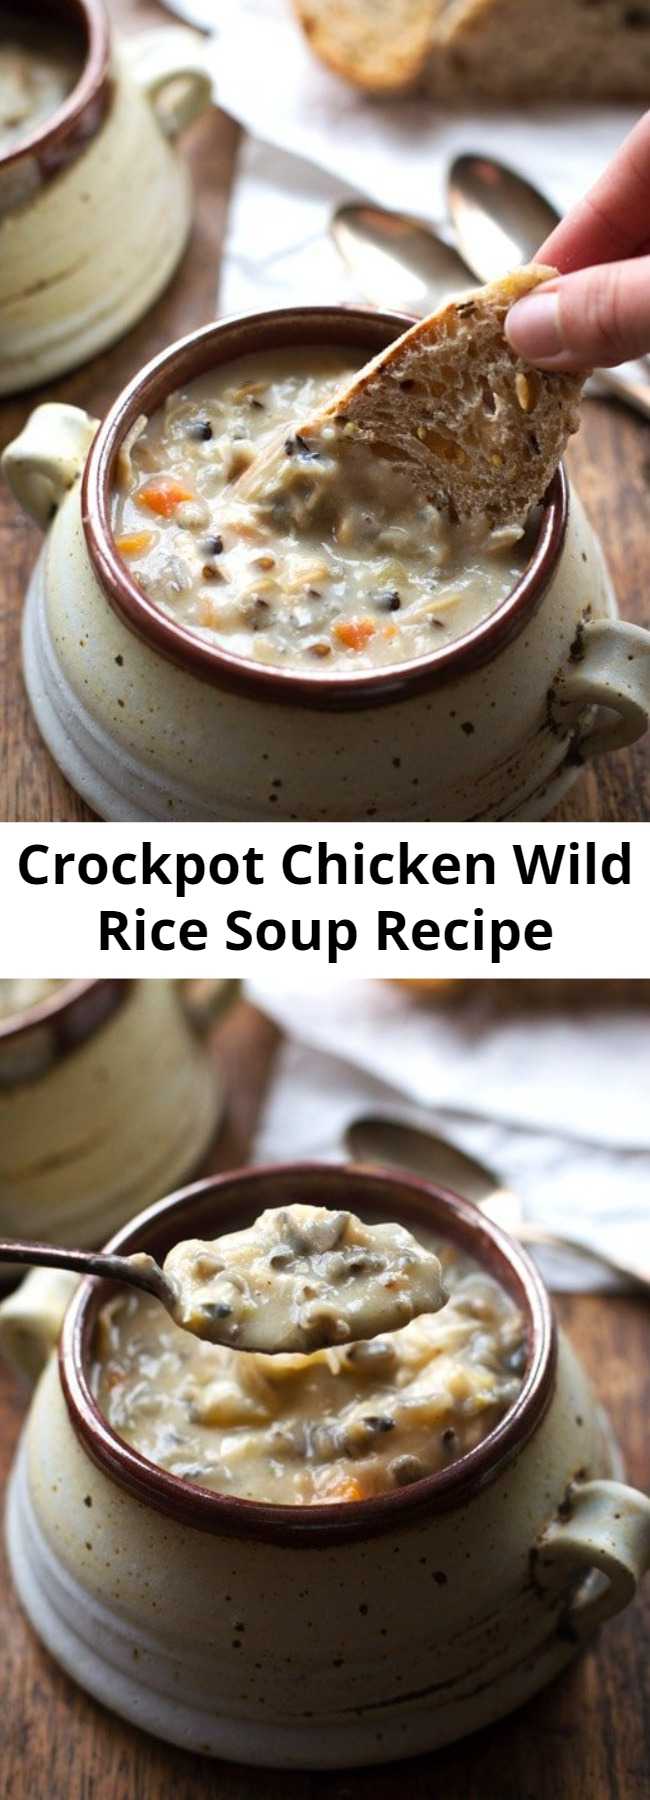 Easy Crockpot Chicken Wild Rice Soup Recipe - This Crockpot Chicken Wild Rice Soup is so darn simple to make and goes perfectly with a piece of crusty bread on a cold winter night. #soup #crockpot #slowcooker #chicken #easy #dinner